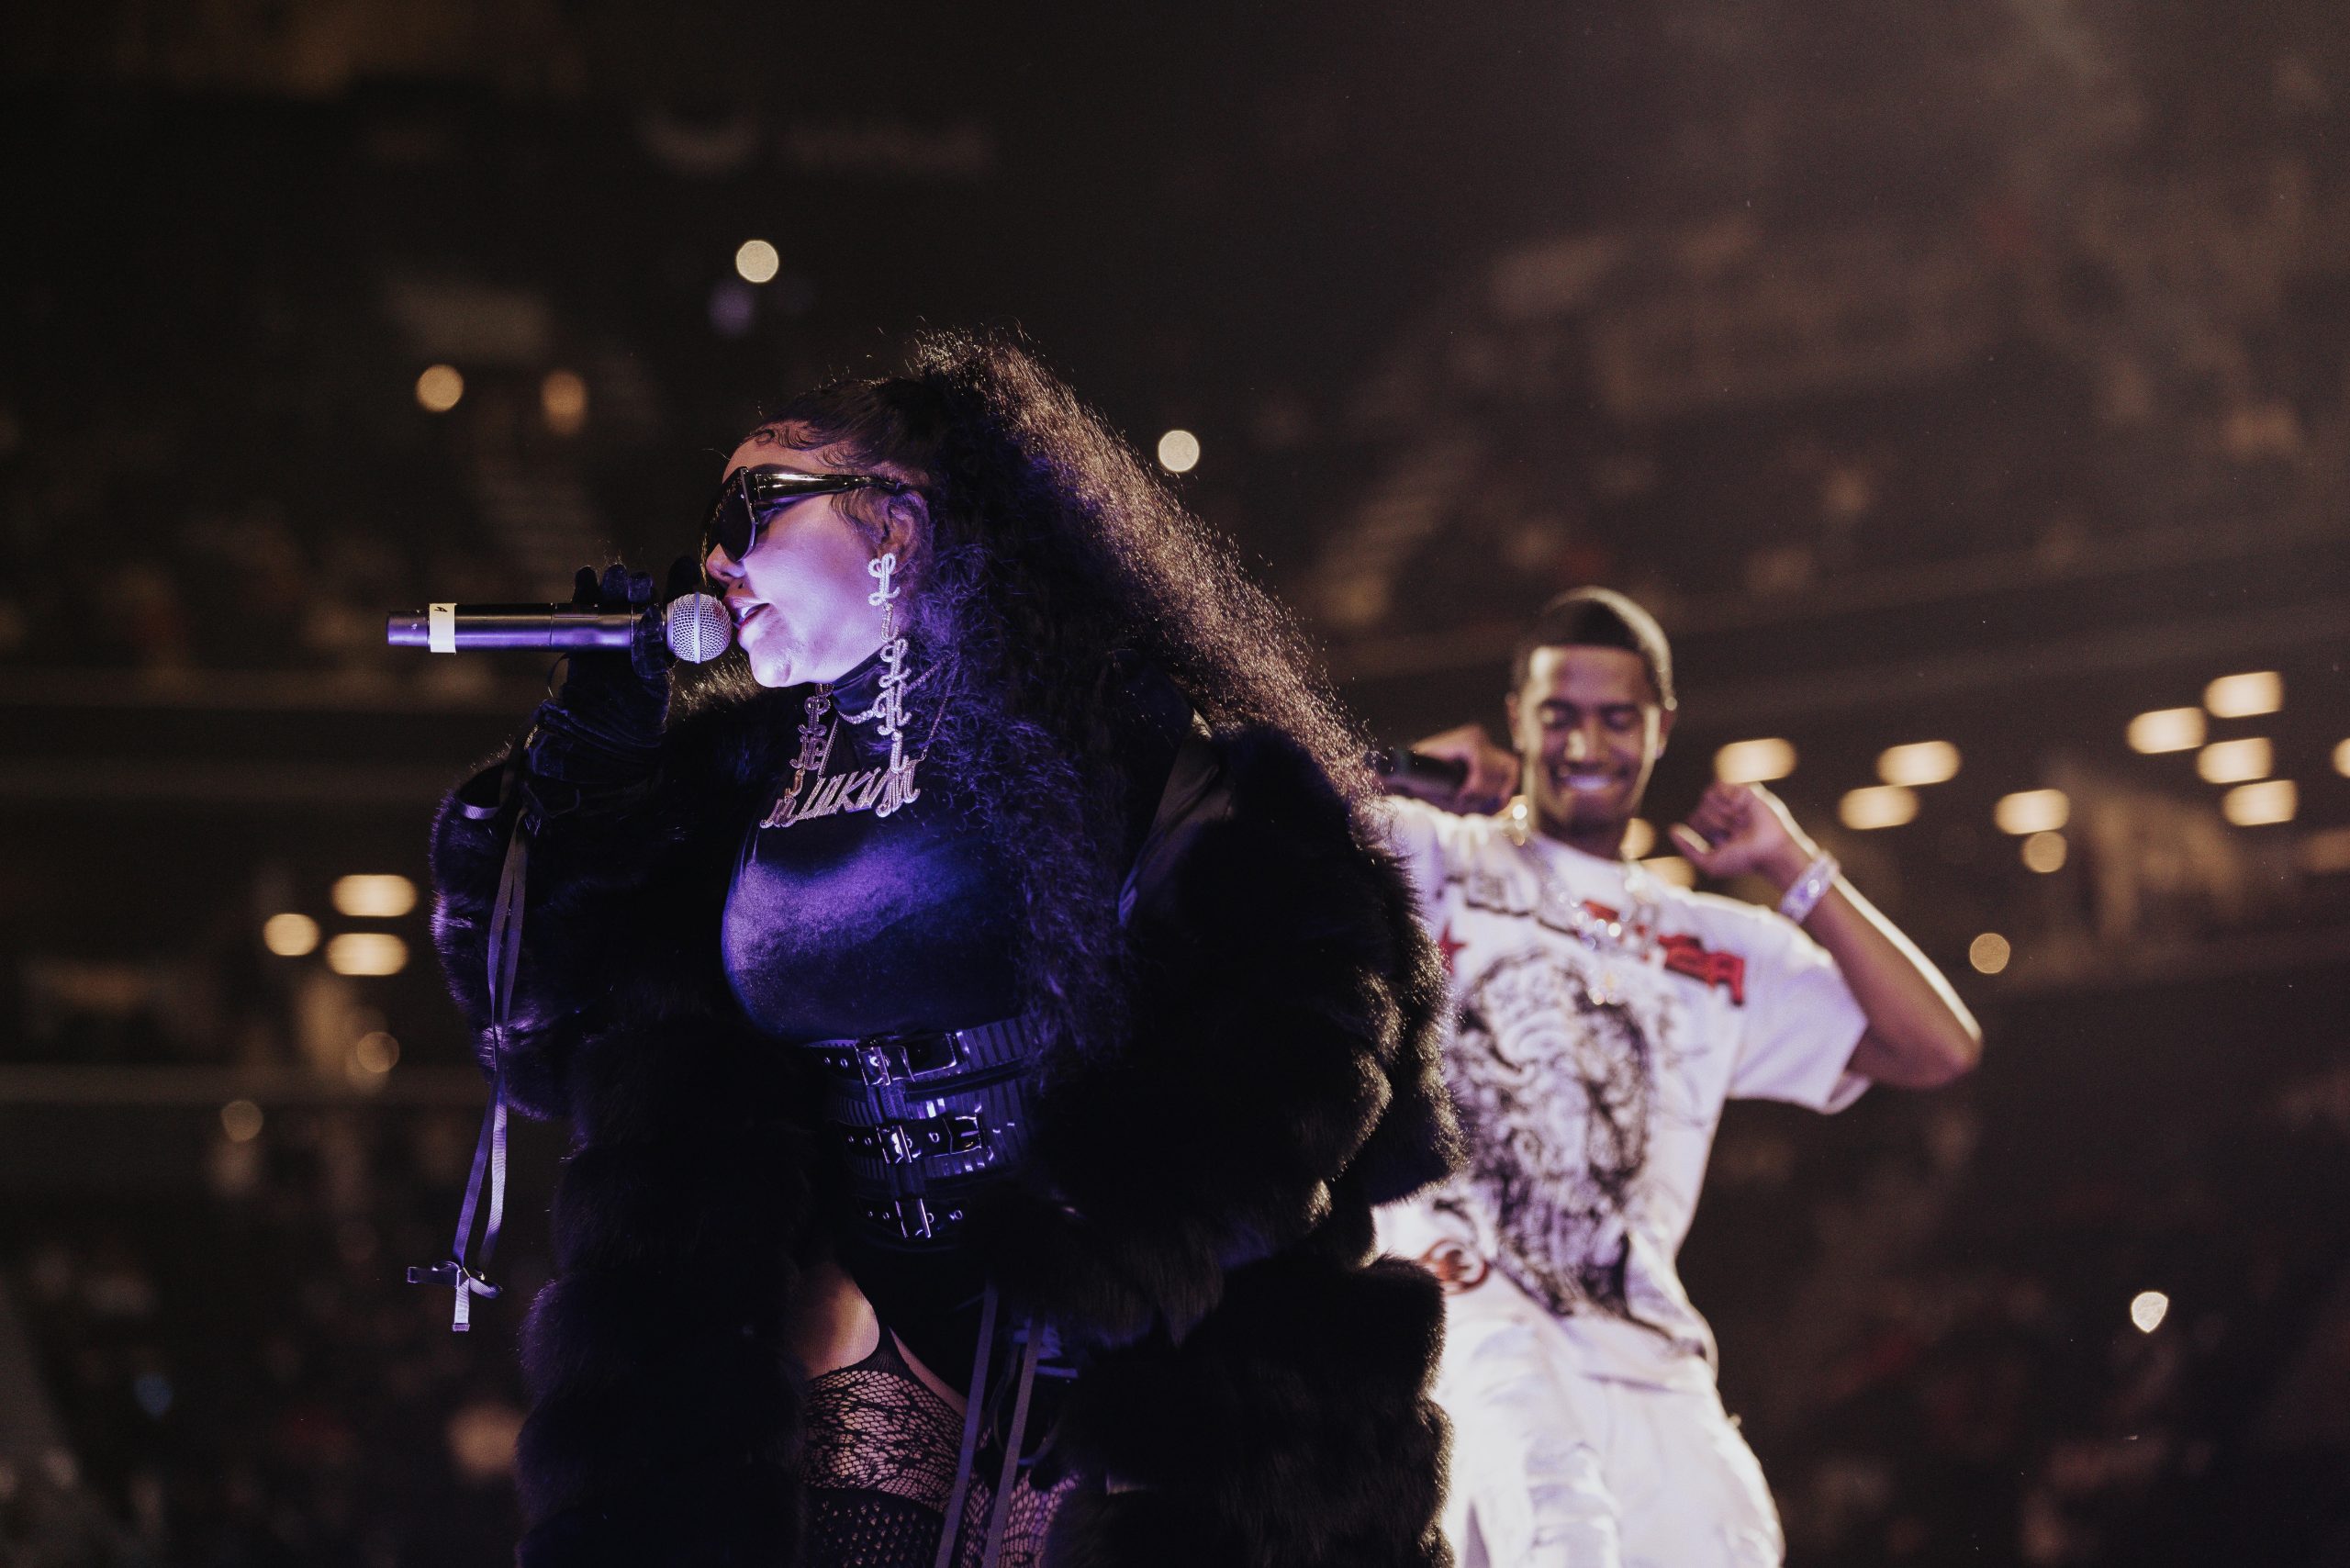 Lil Kim and King Combs onstage at The Ball Drops in Brooklyn concert - Barclays December 30, 2022 - Photo Credit Henry Hwu